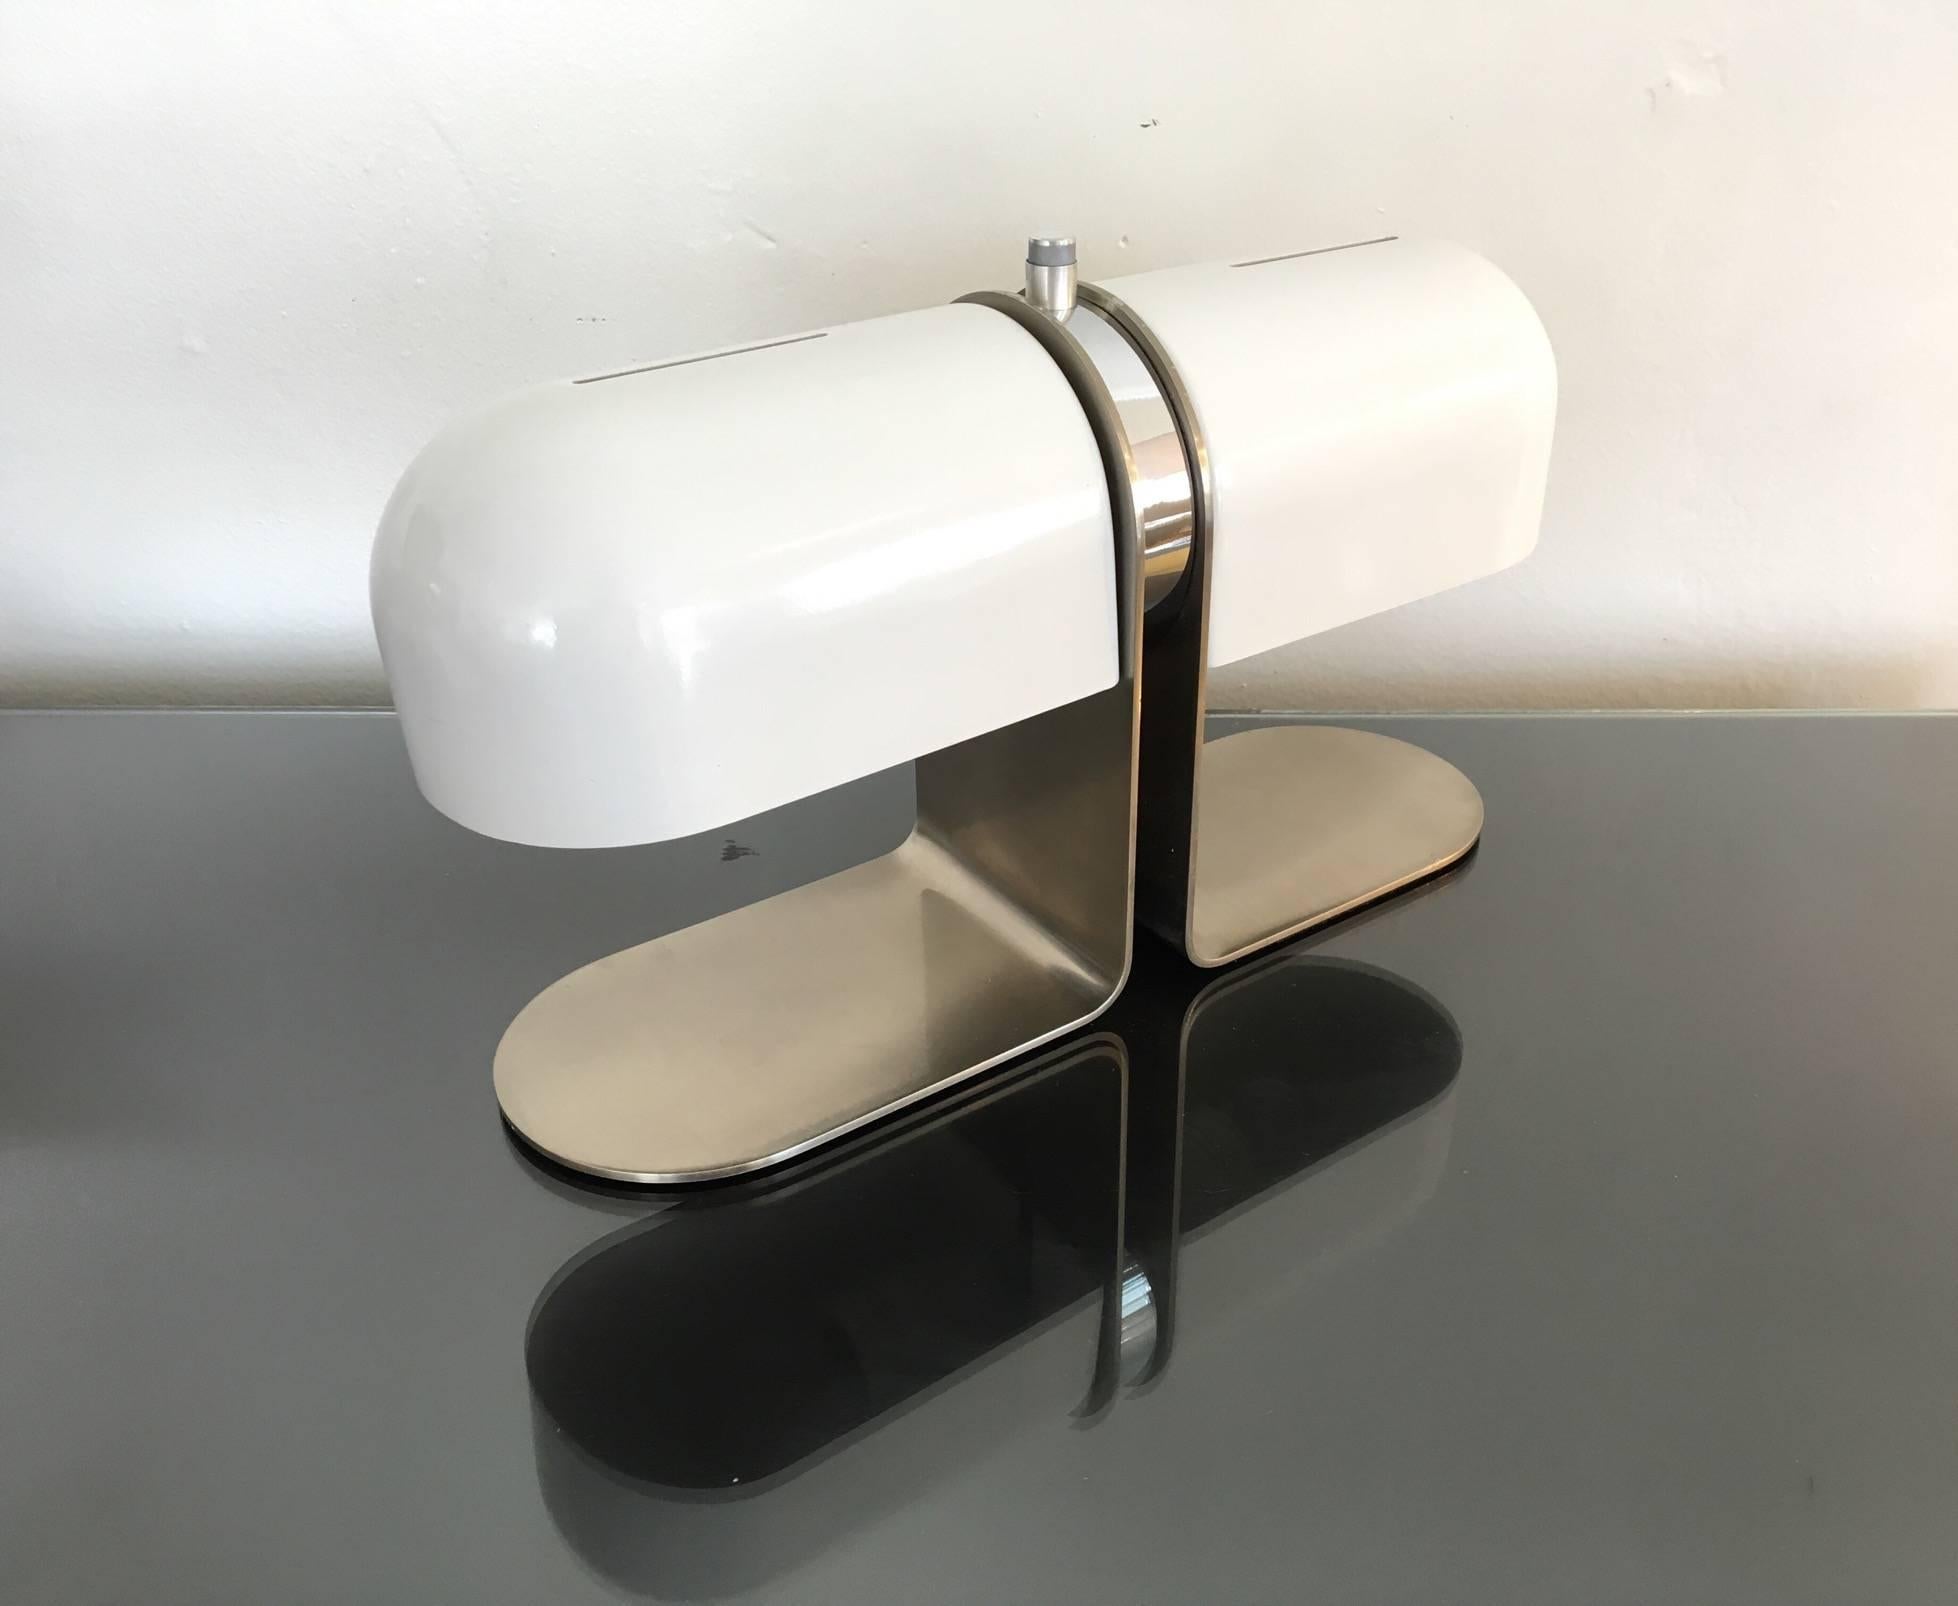 Beautiful designed double shaded desk lamp from the 1960s.
Made out of brushed stainless steel and the shades are powder coated white. 
It had a European plug. Not sure on who designed it. It has a marking, see photos.